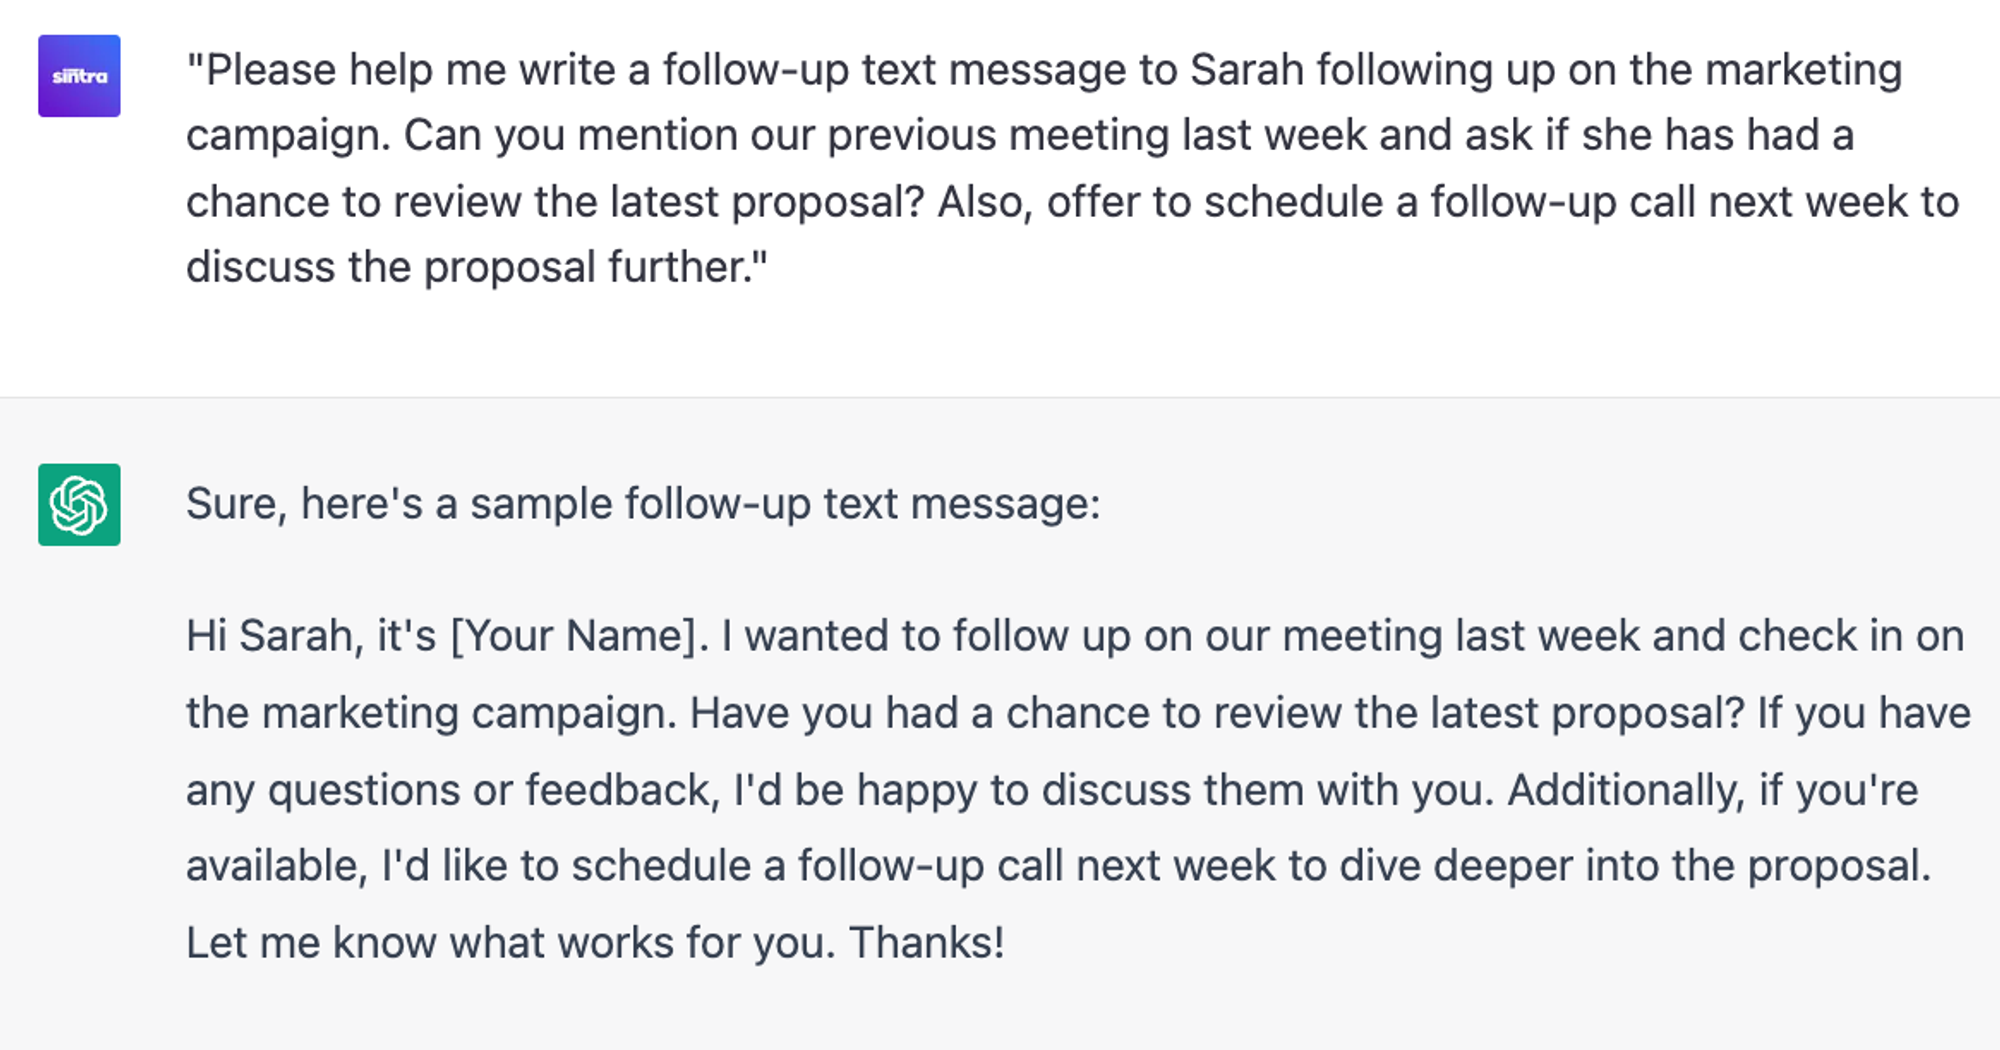  6 Expert ChatGPT Prompts: Writing follow-up text messages